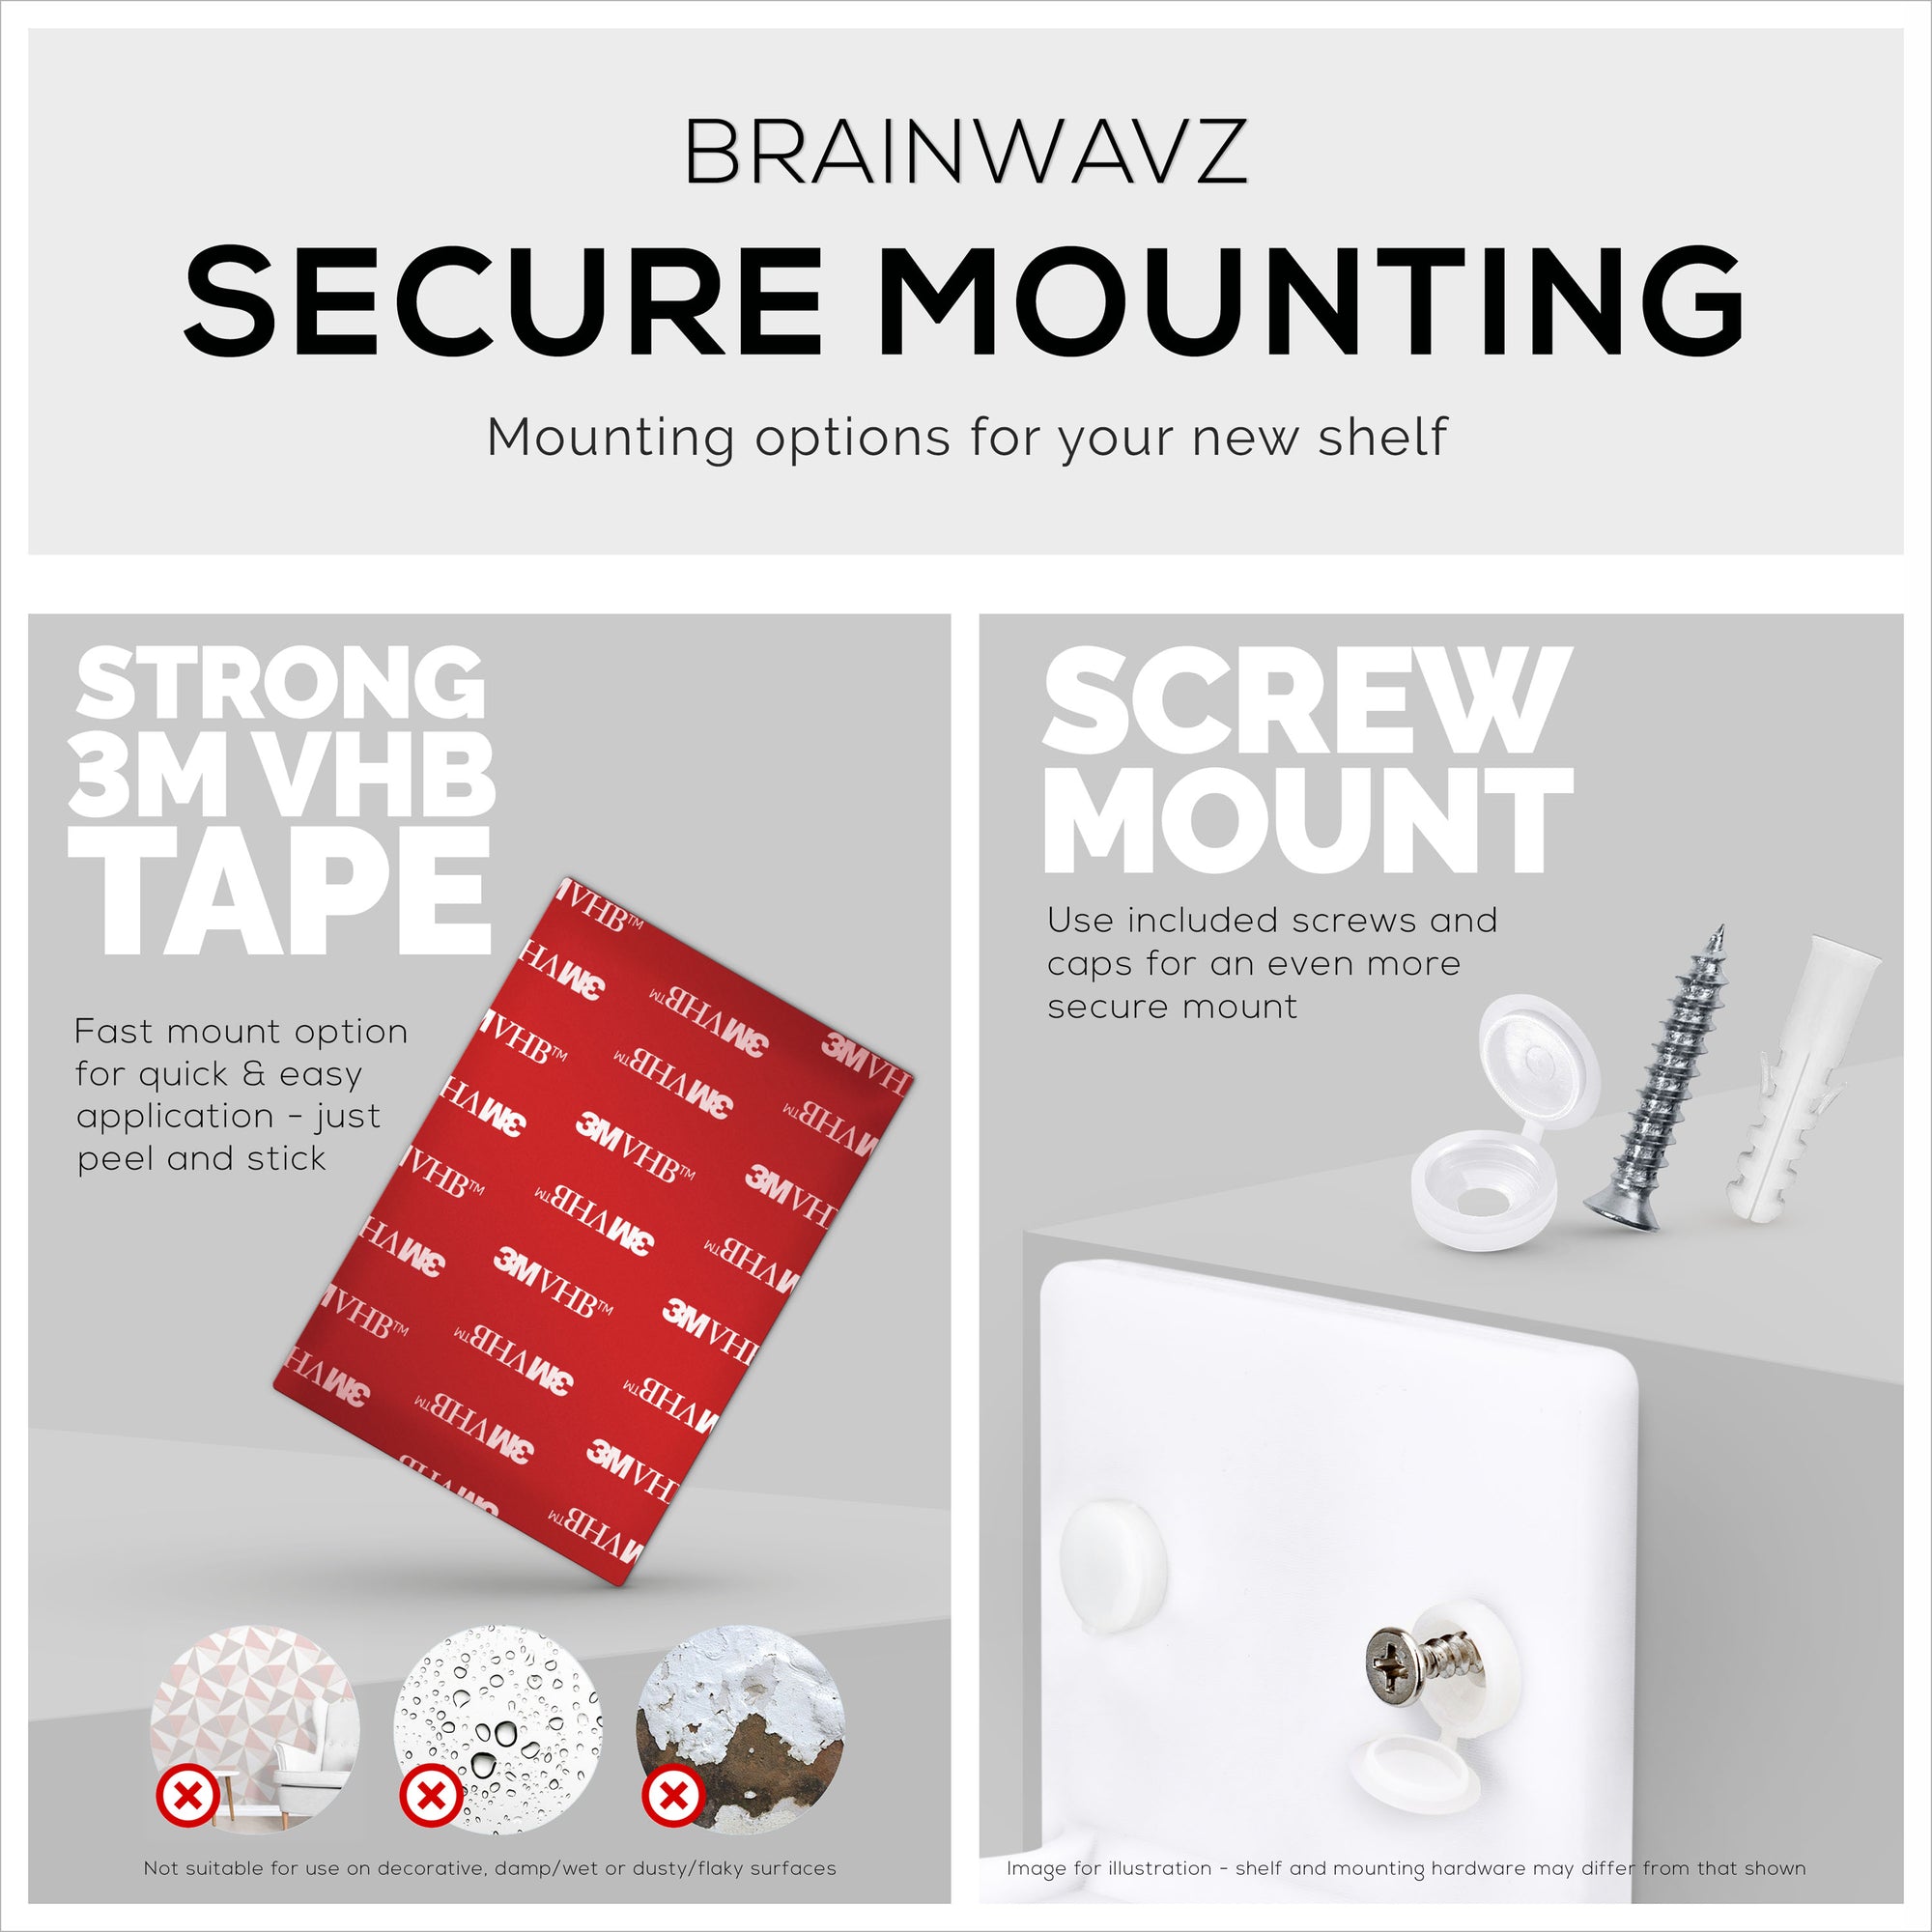 6.5” Small Floating Shelf, Adhesive & Screw In, for Bluetooth Speakers,  Cameras, Plants, Toys & More, Universal Holder, Easy to Install - Brainwavz  Audio